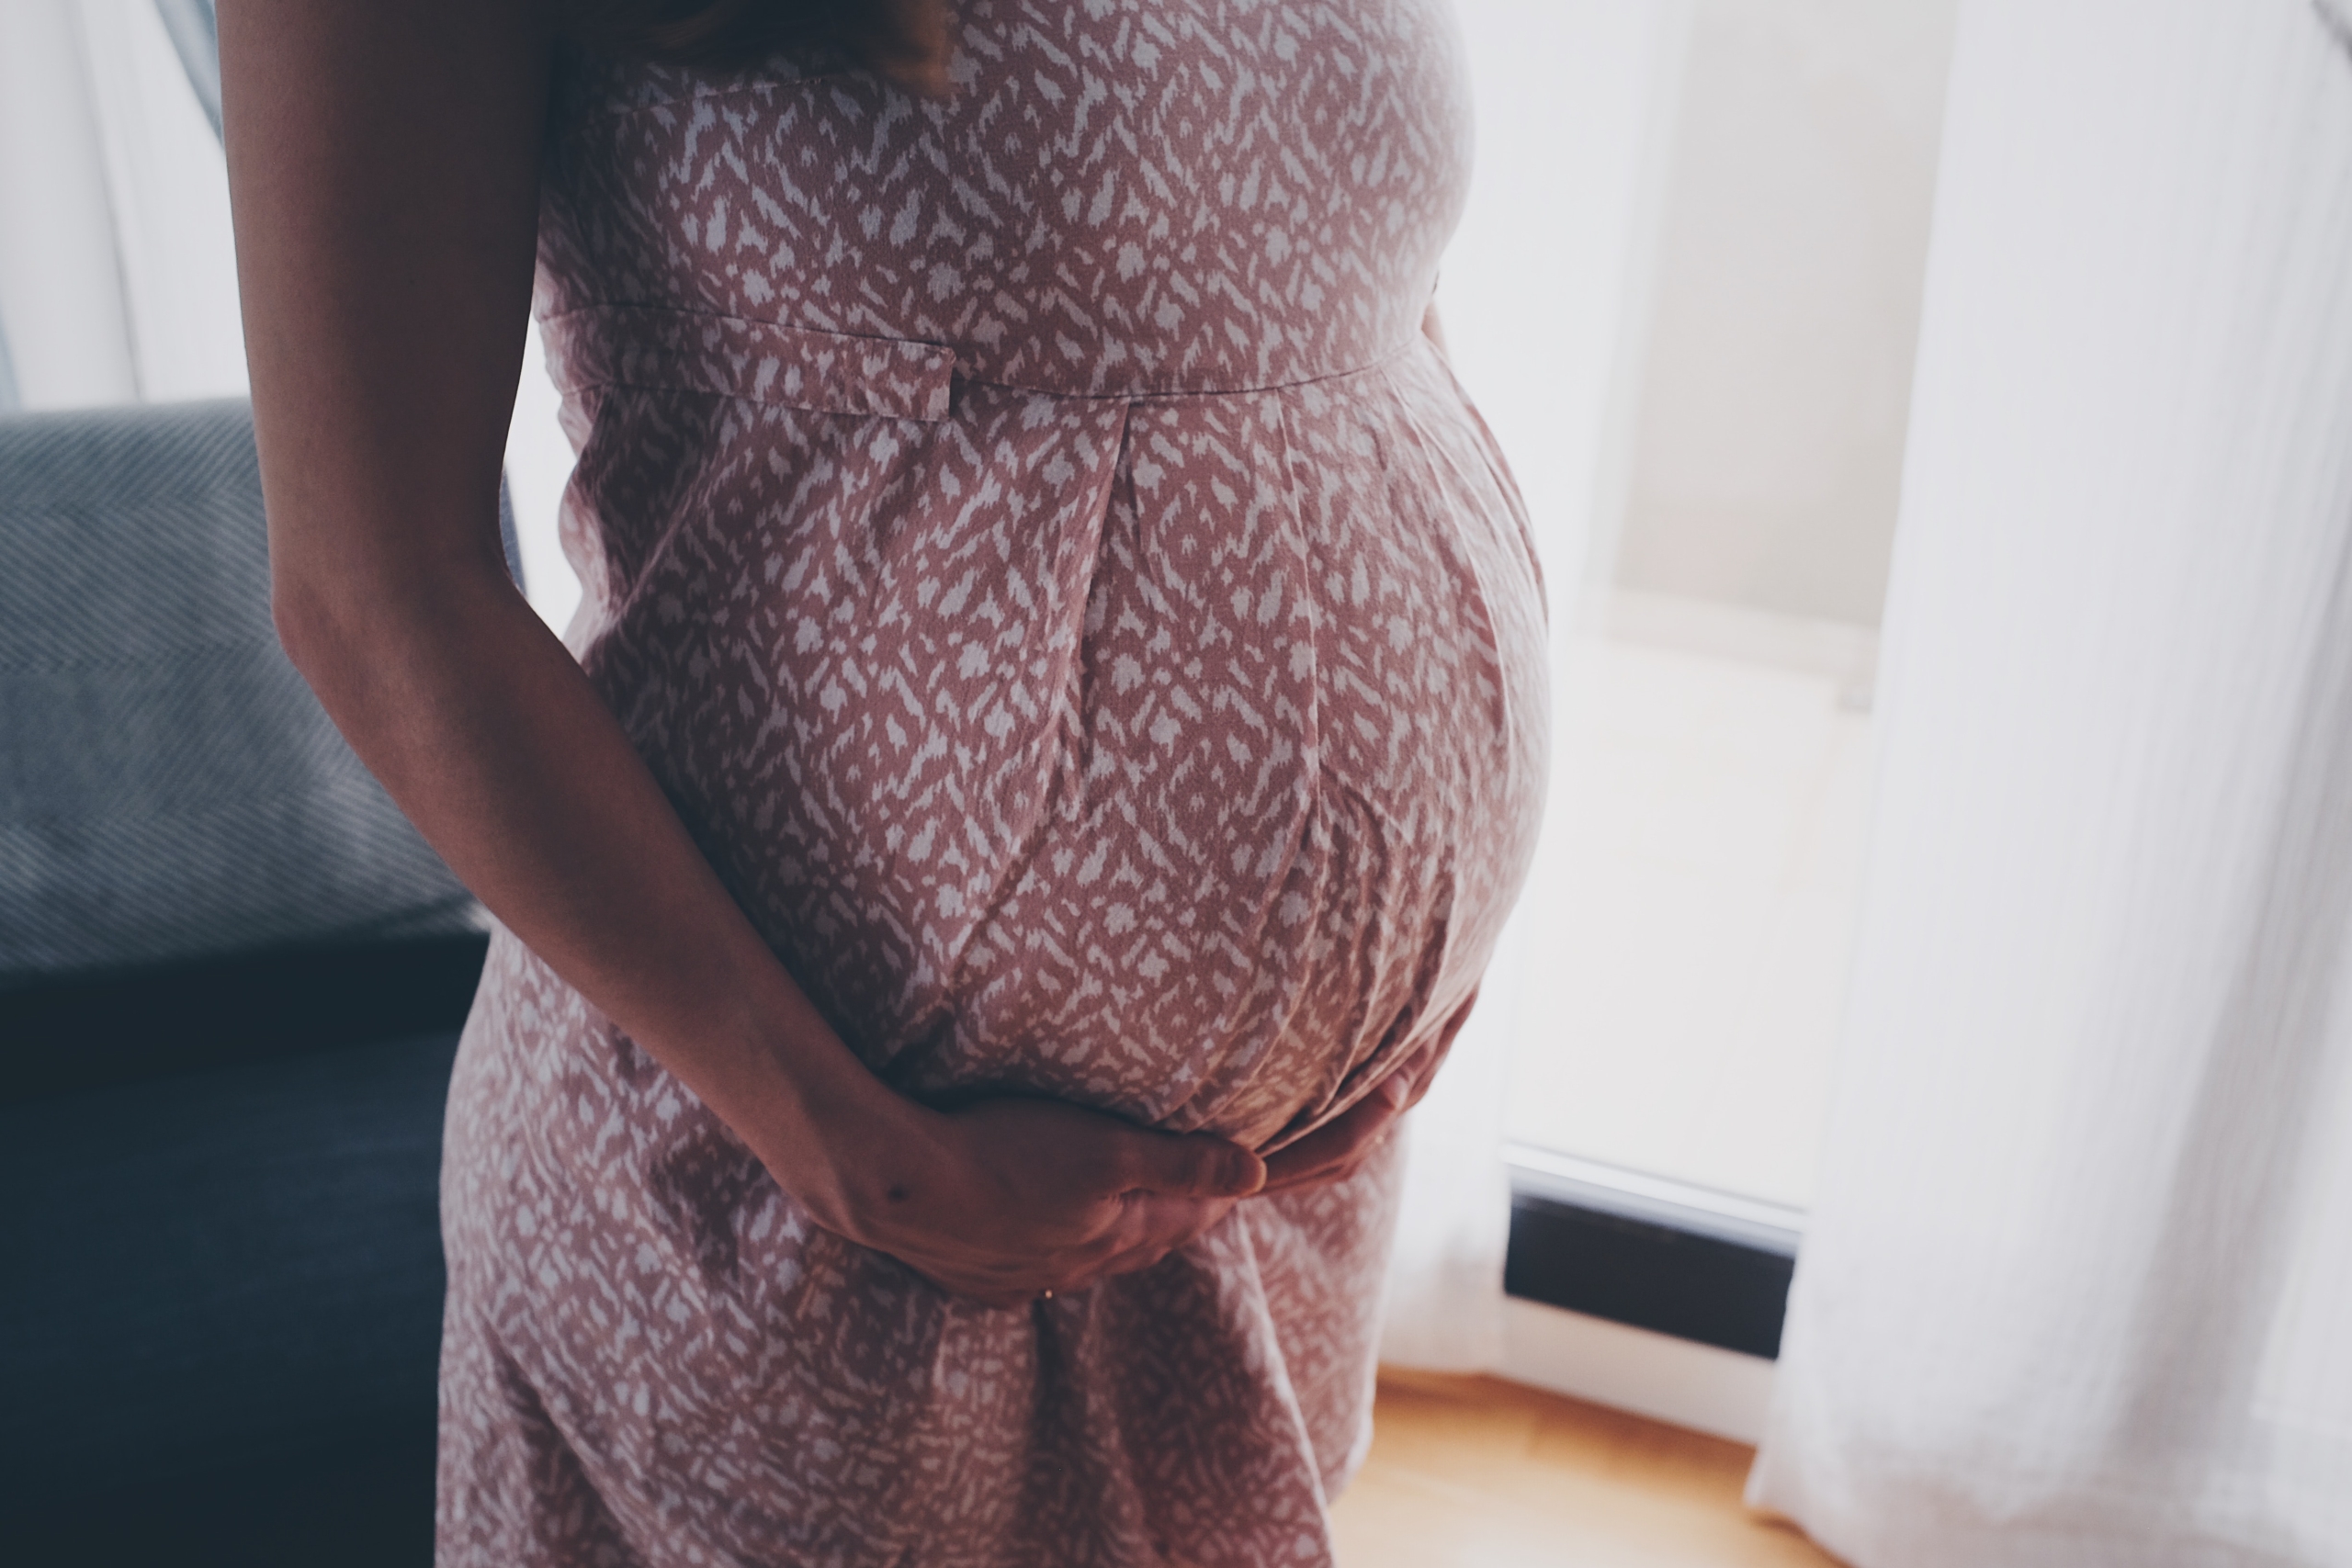 What Disqualifies Me from Being a Surrogate Mother? - Surrogate Parenting  Services